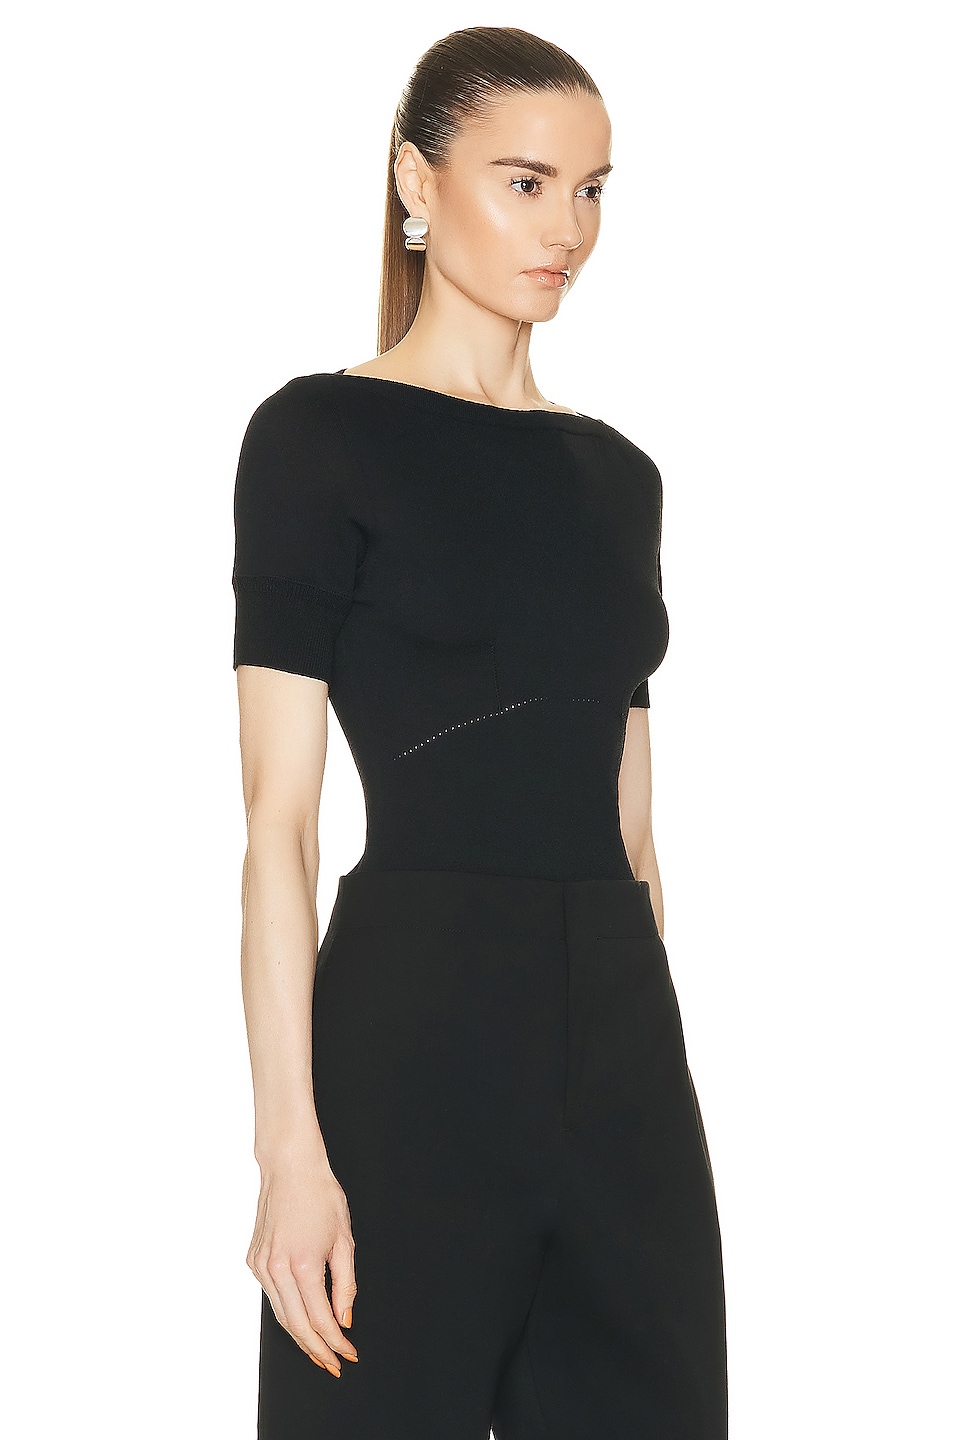 Lemaire Darted Fitted Top in Black | FWRD